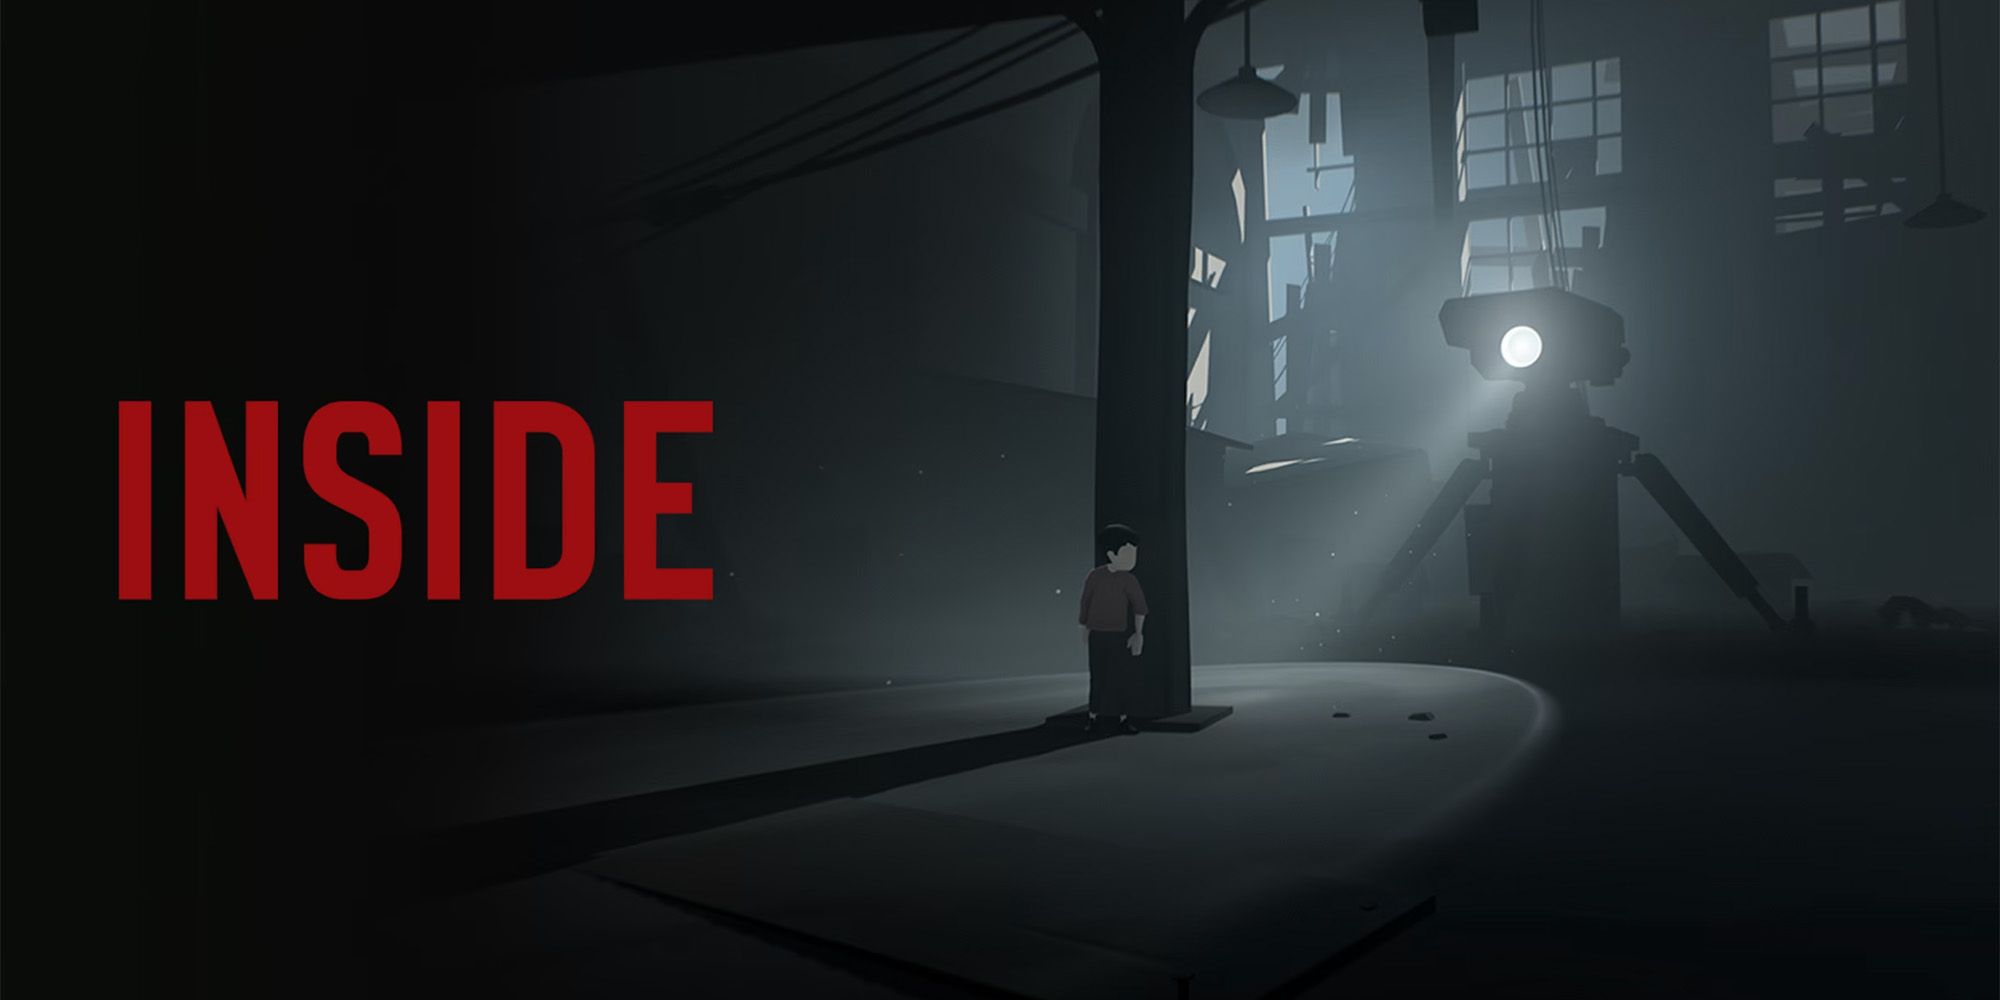 Inside - A Boy Hides From A Giant Robot